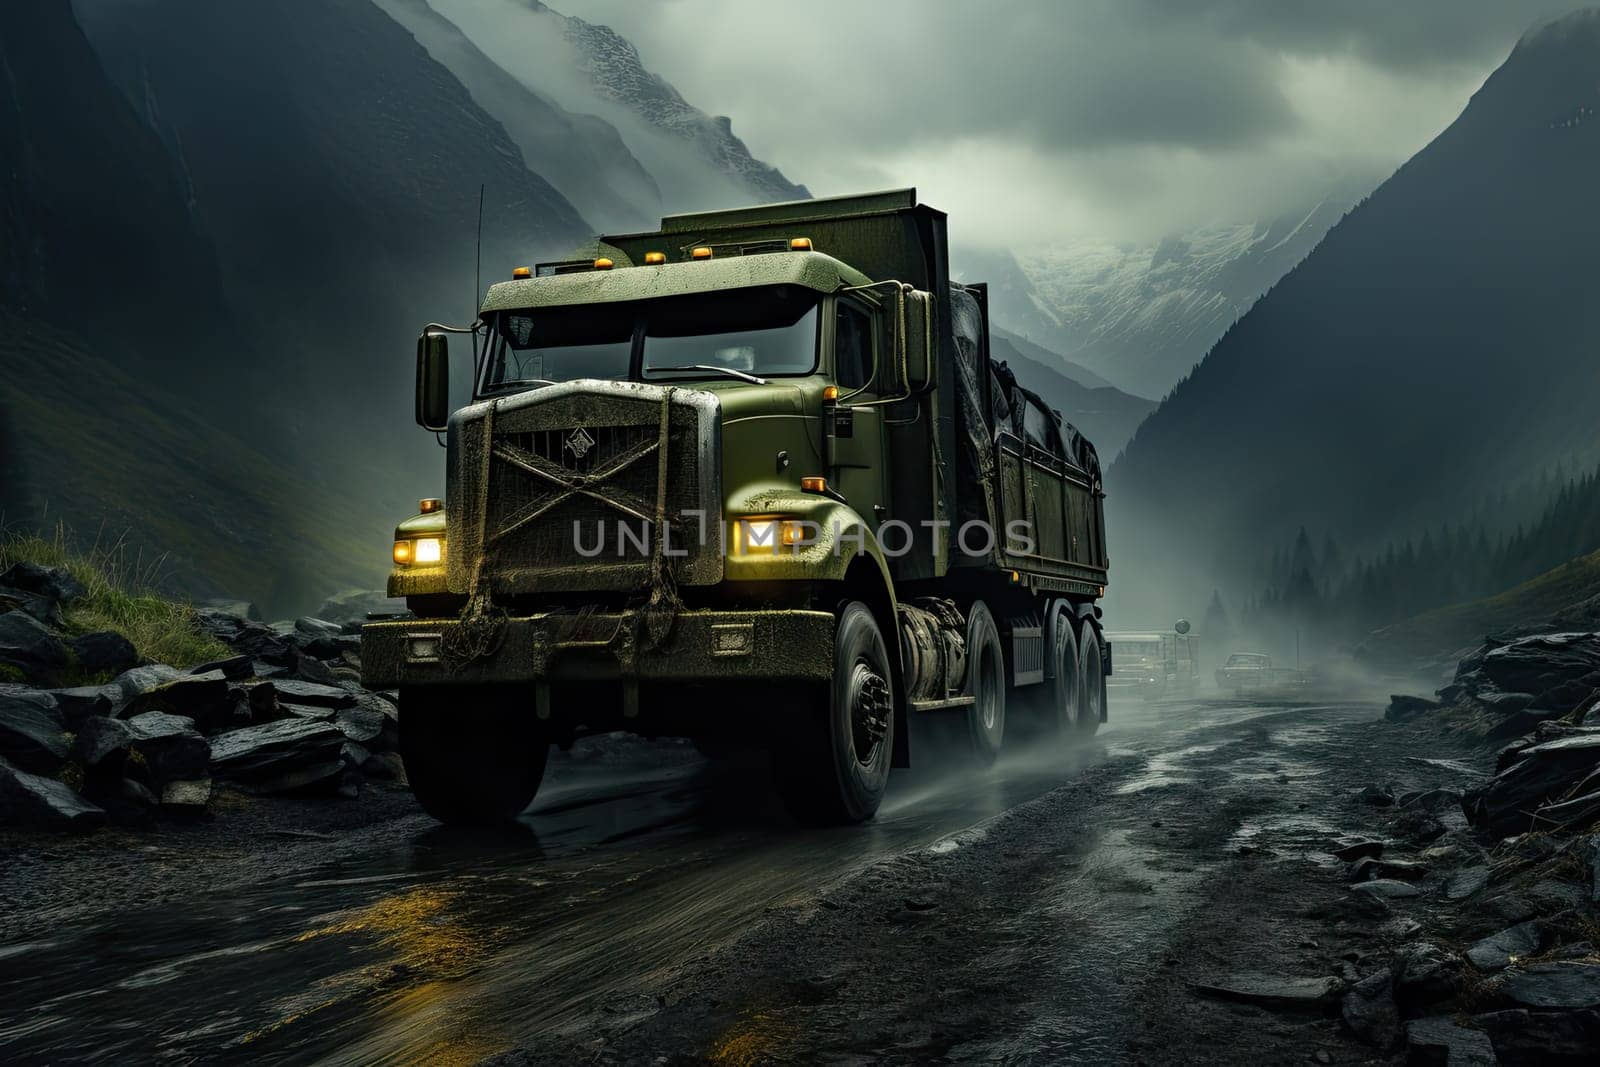 A Mighty Truck Conquering the Rugged Terrain with Power and Determination Created With Generative AI Technology